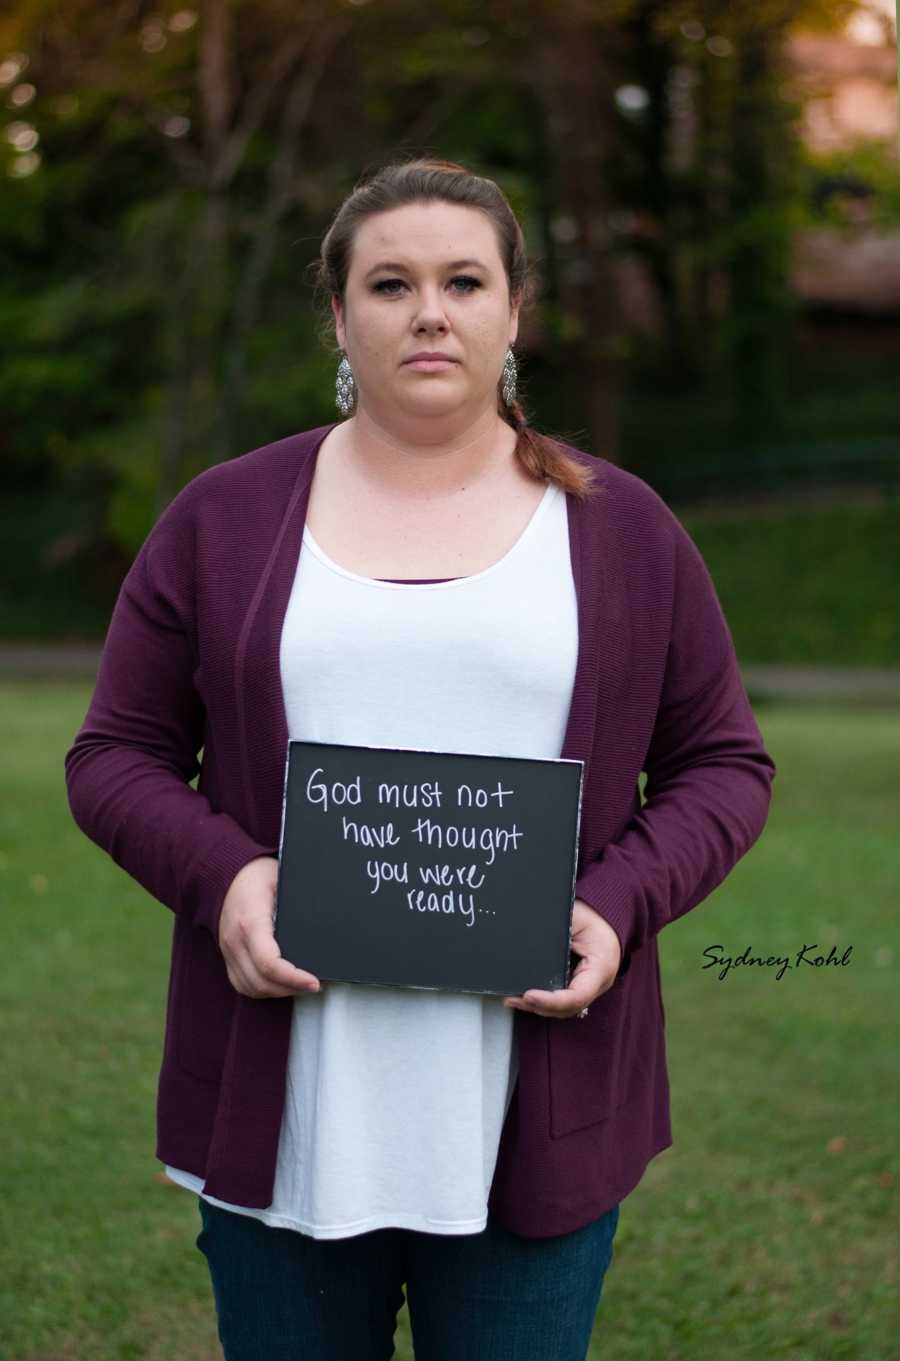 Woman who experienced child loss holds sign that says, "God must have not thought you were ready"